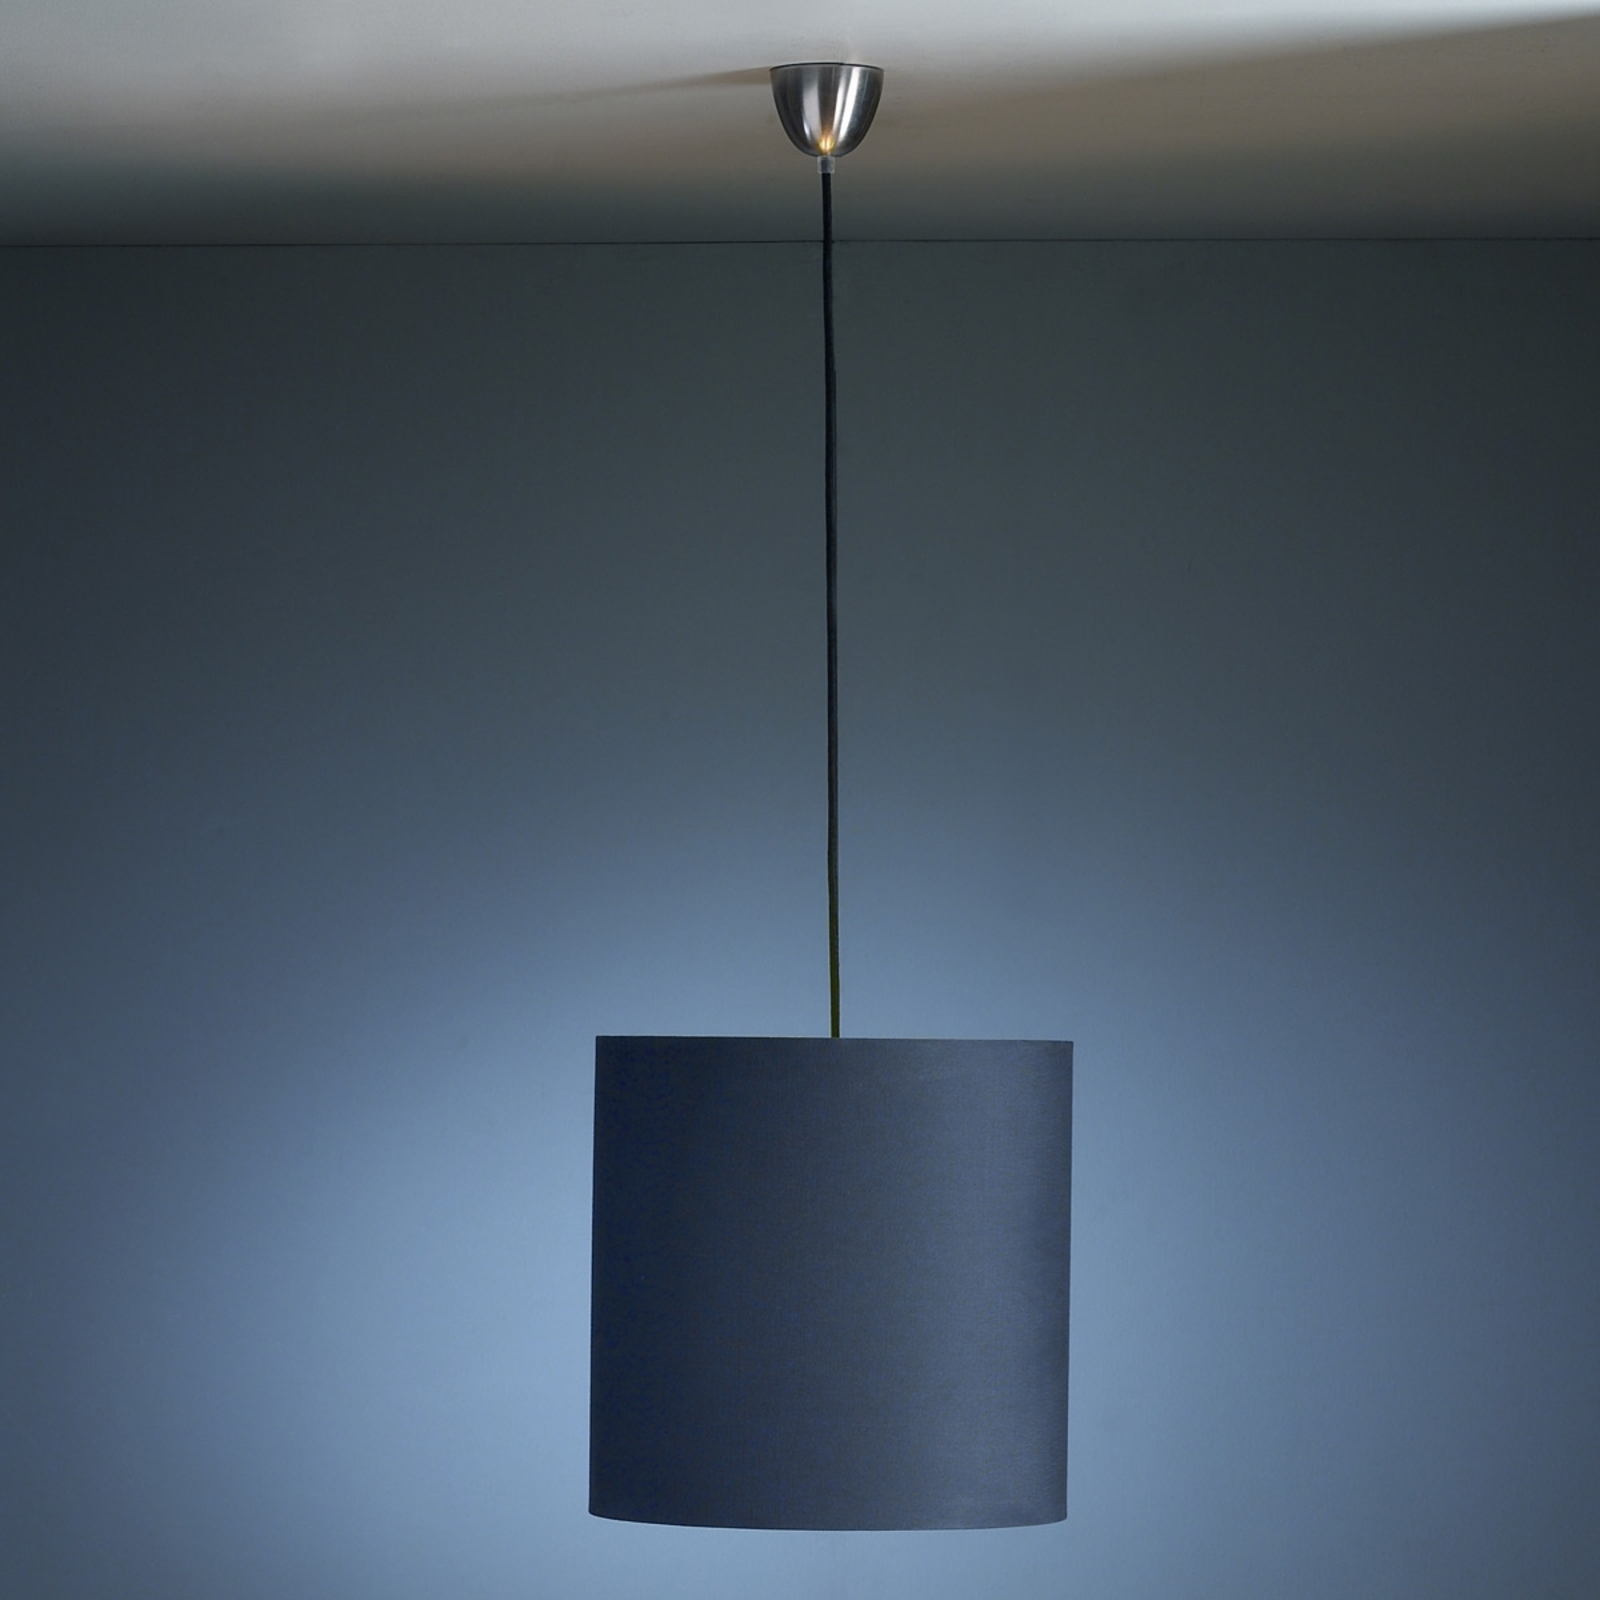 Anthracite-coloured pendant light by Schnepel